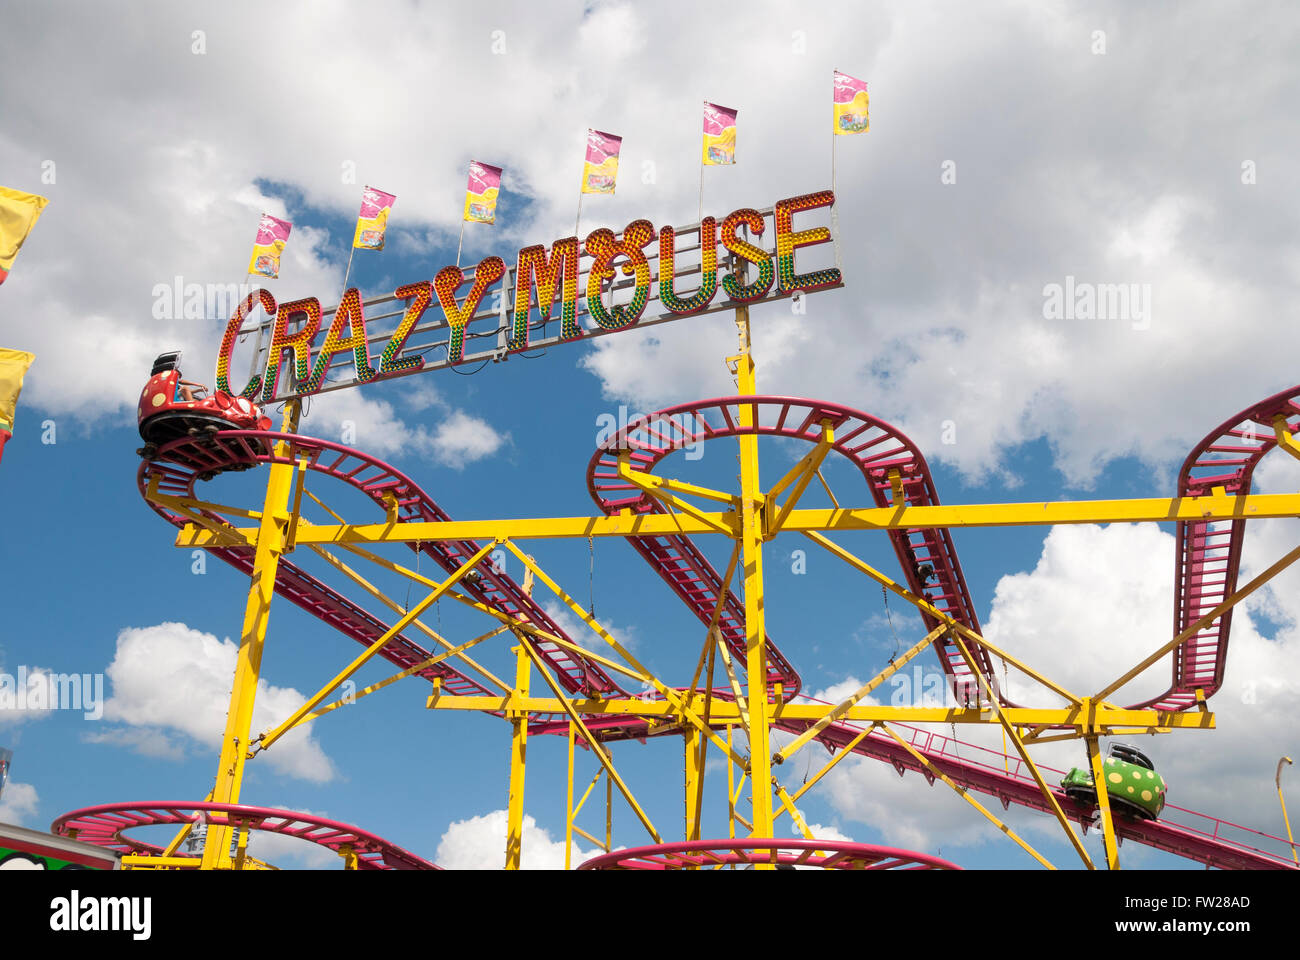 The Crazy Mouse roller coaster temporarily installed as a ride attraction on the midway at the Canadian National Exhibition. Stock Photo